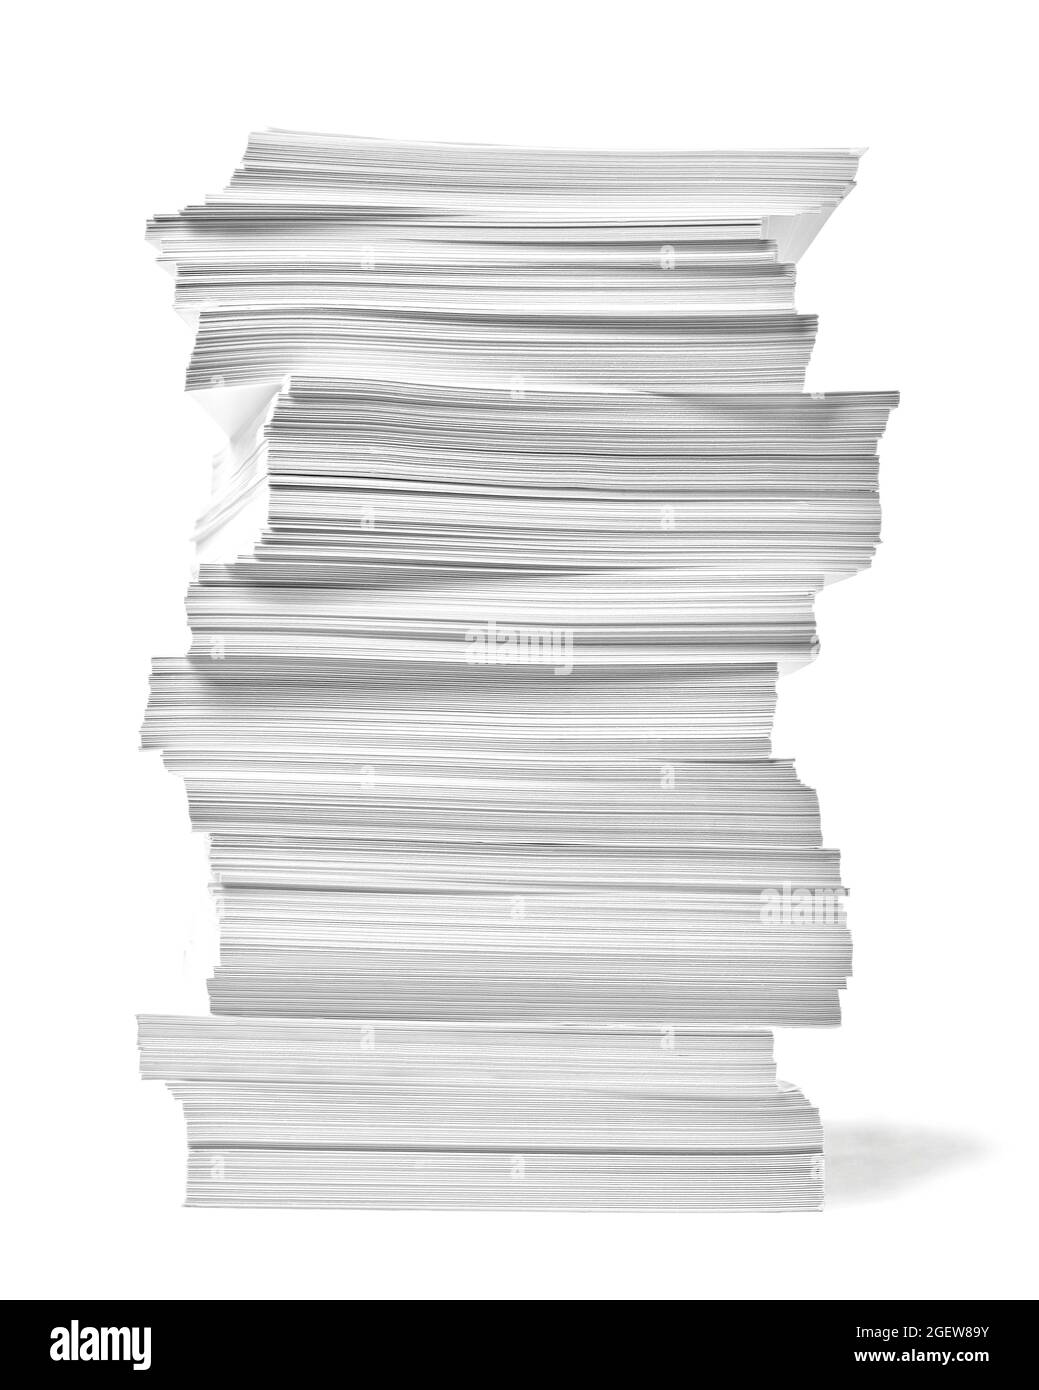 paper stack pile office paperwork busniess education Stock Photo - Alamy